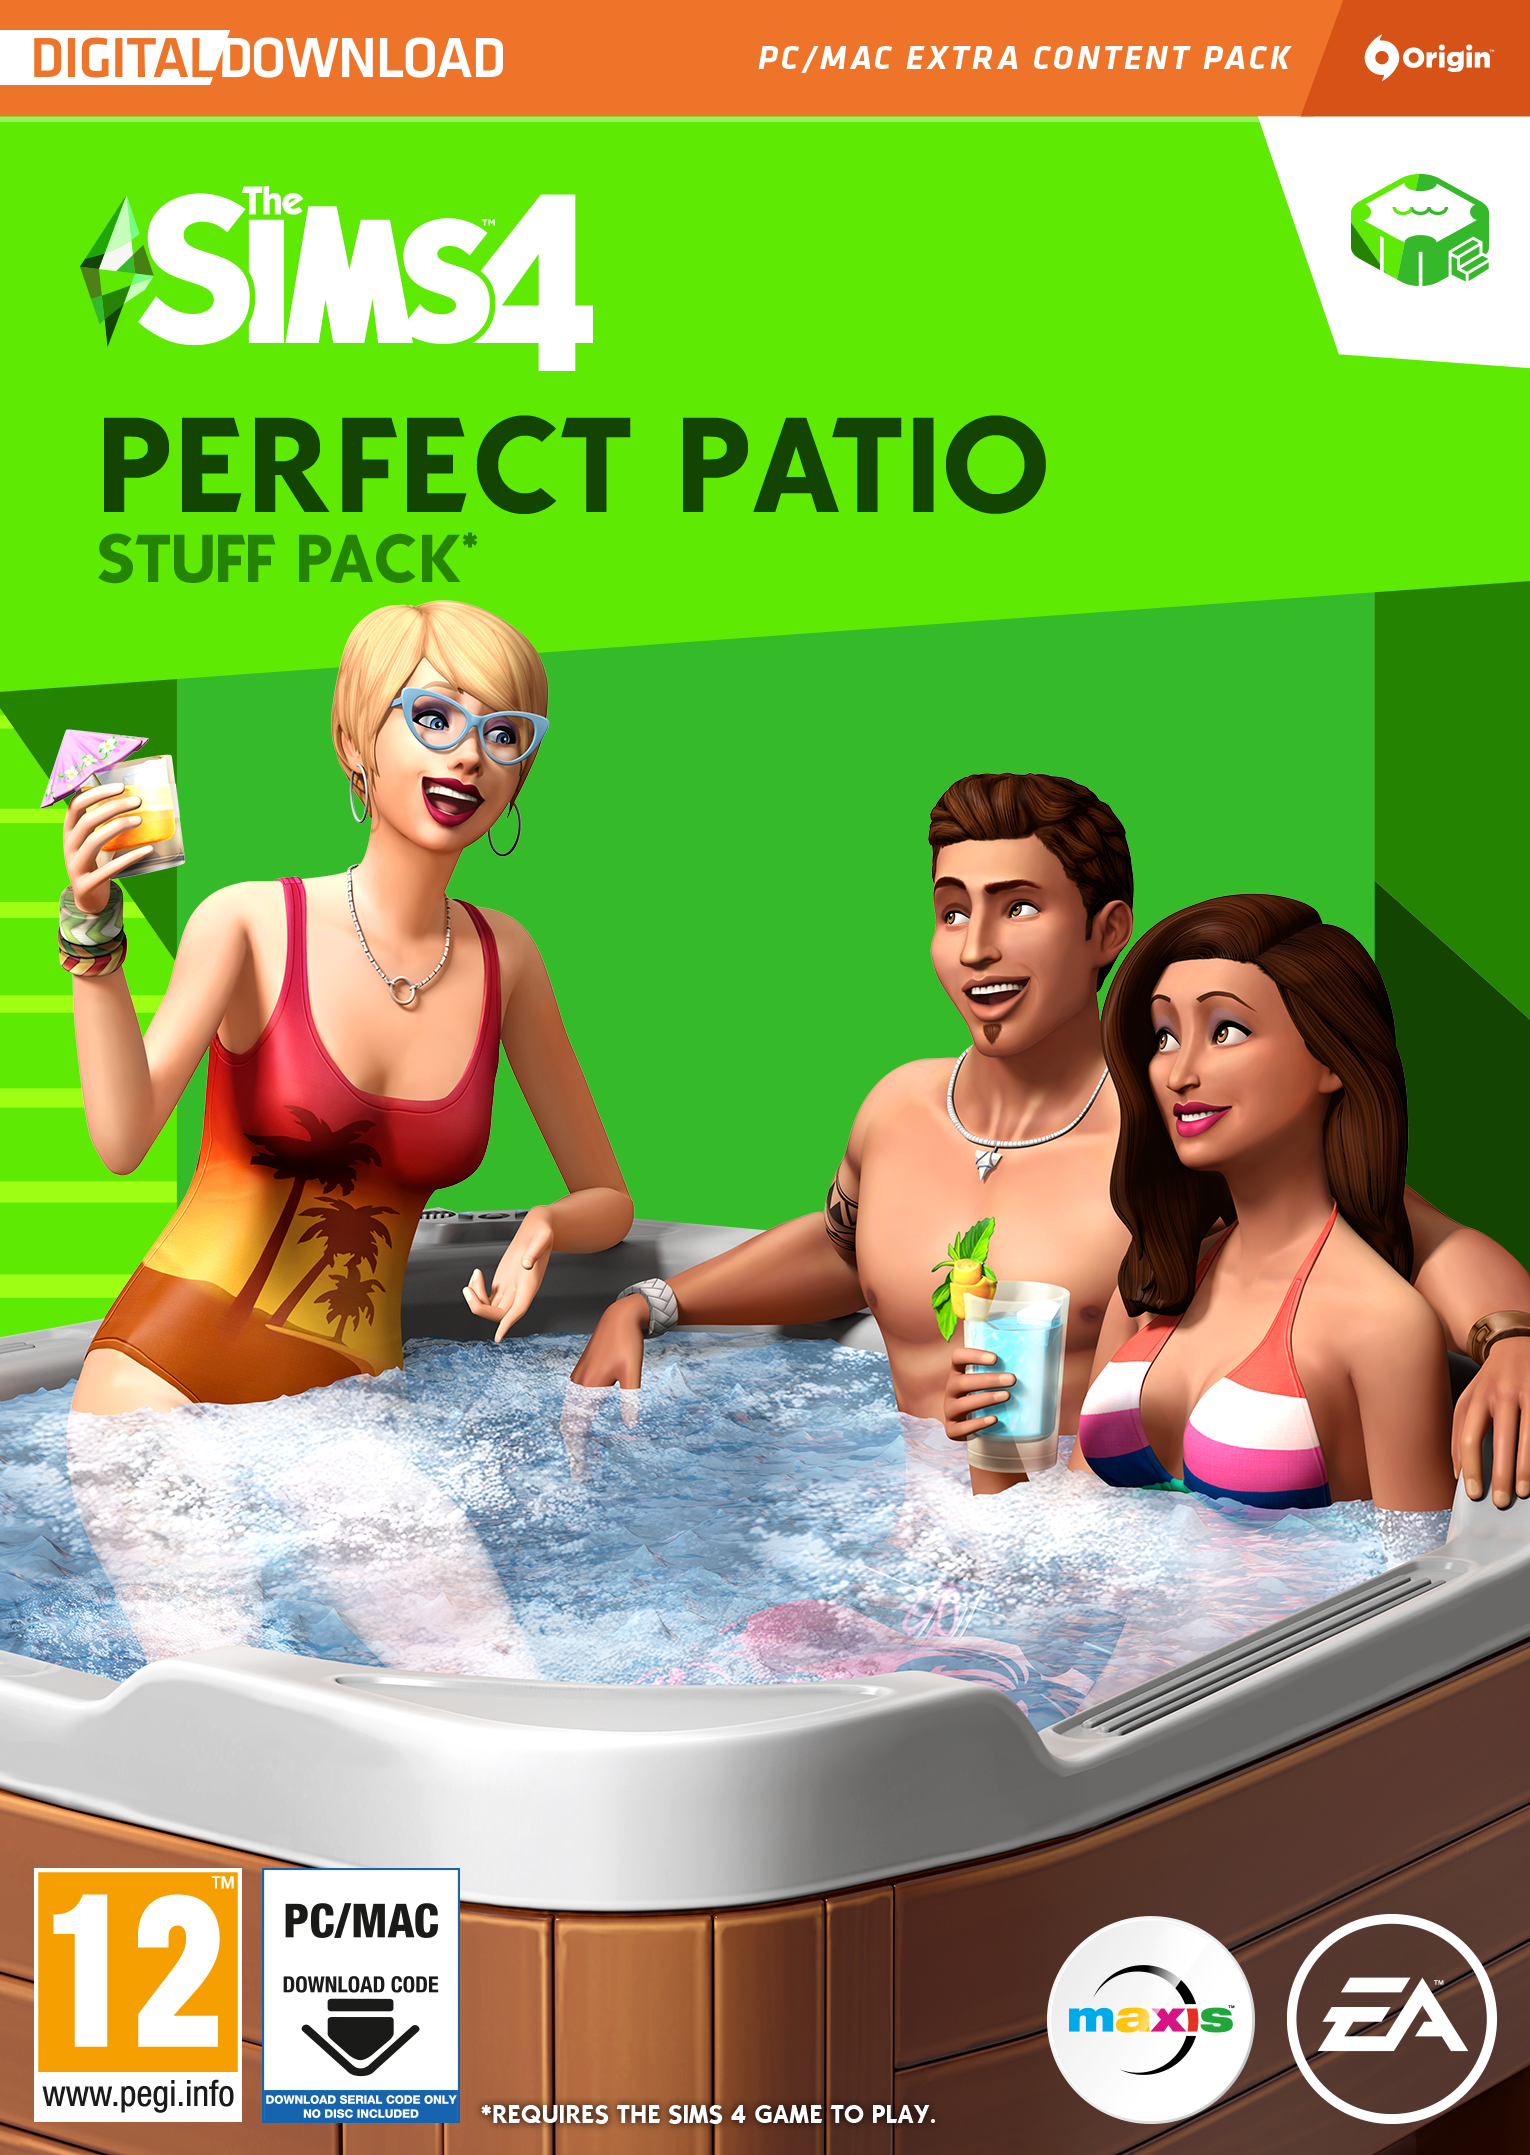 THE SIMS 4 PERFECT PATIO